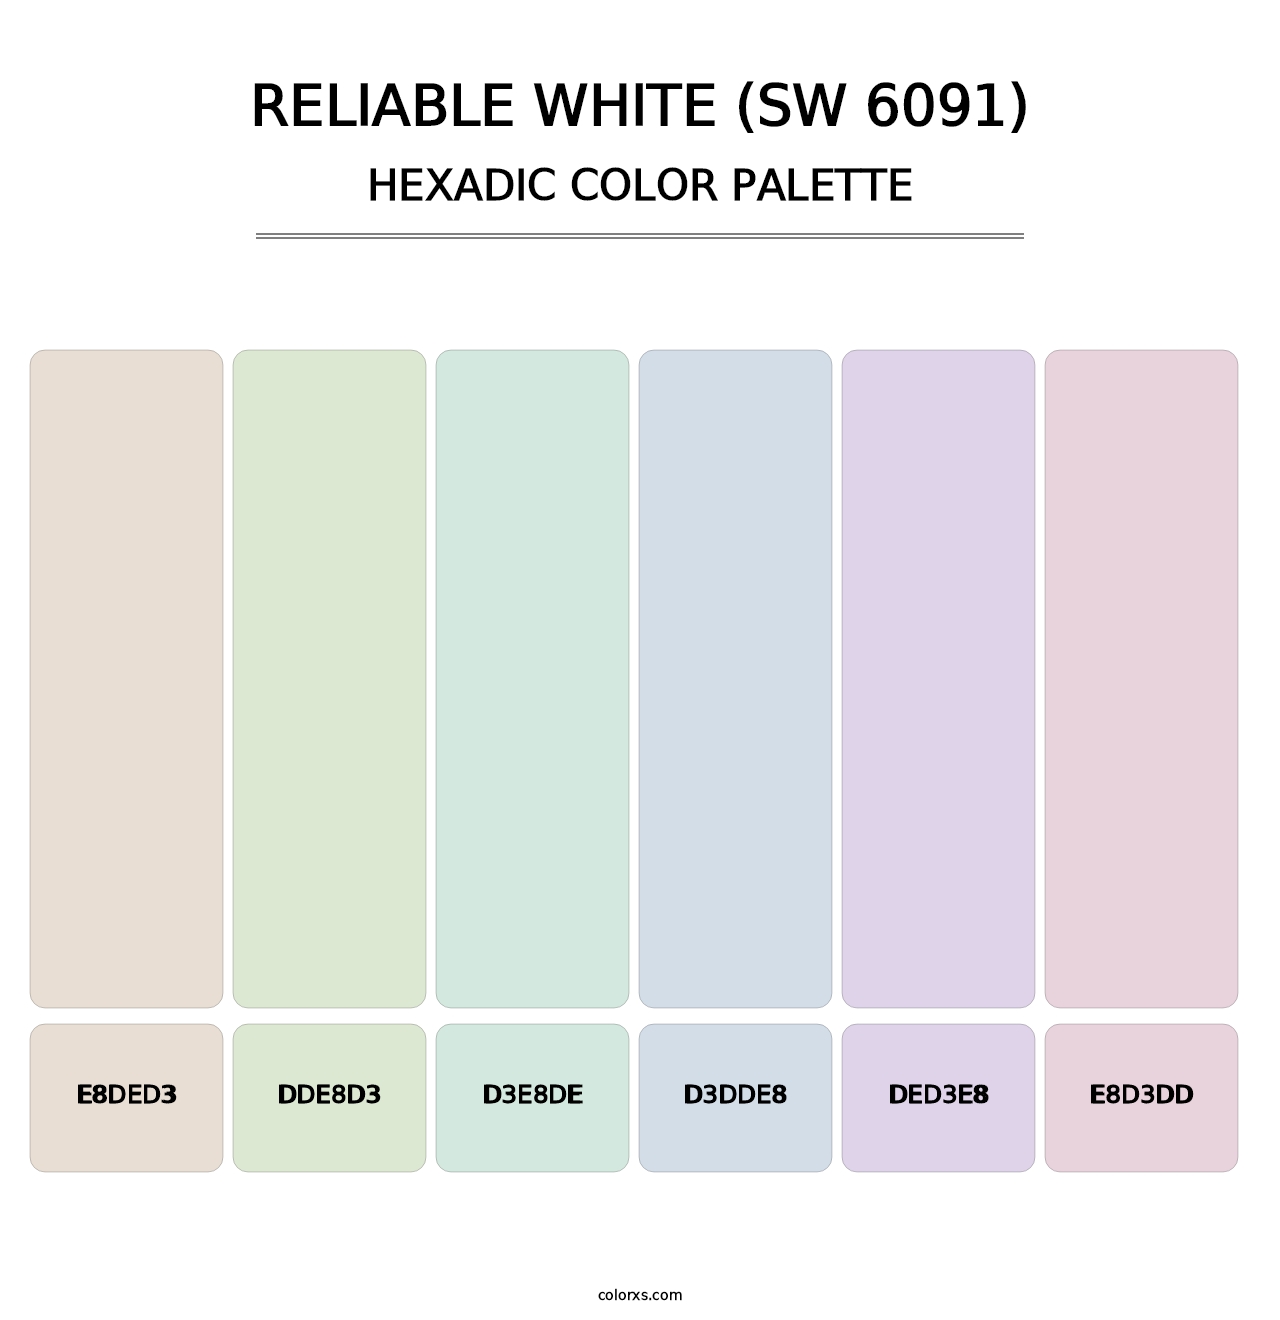 Reliable White (SW 6091) - Hexadic Color Palette